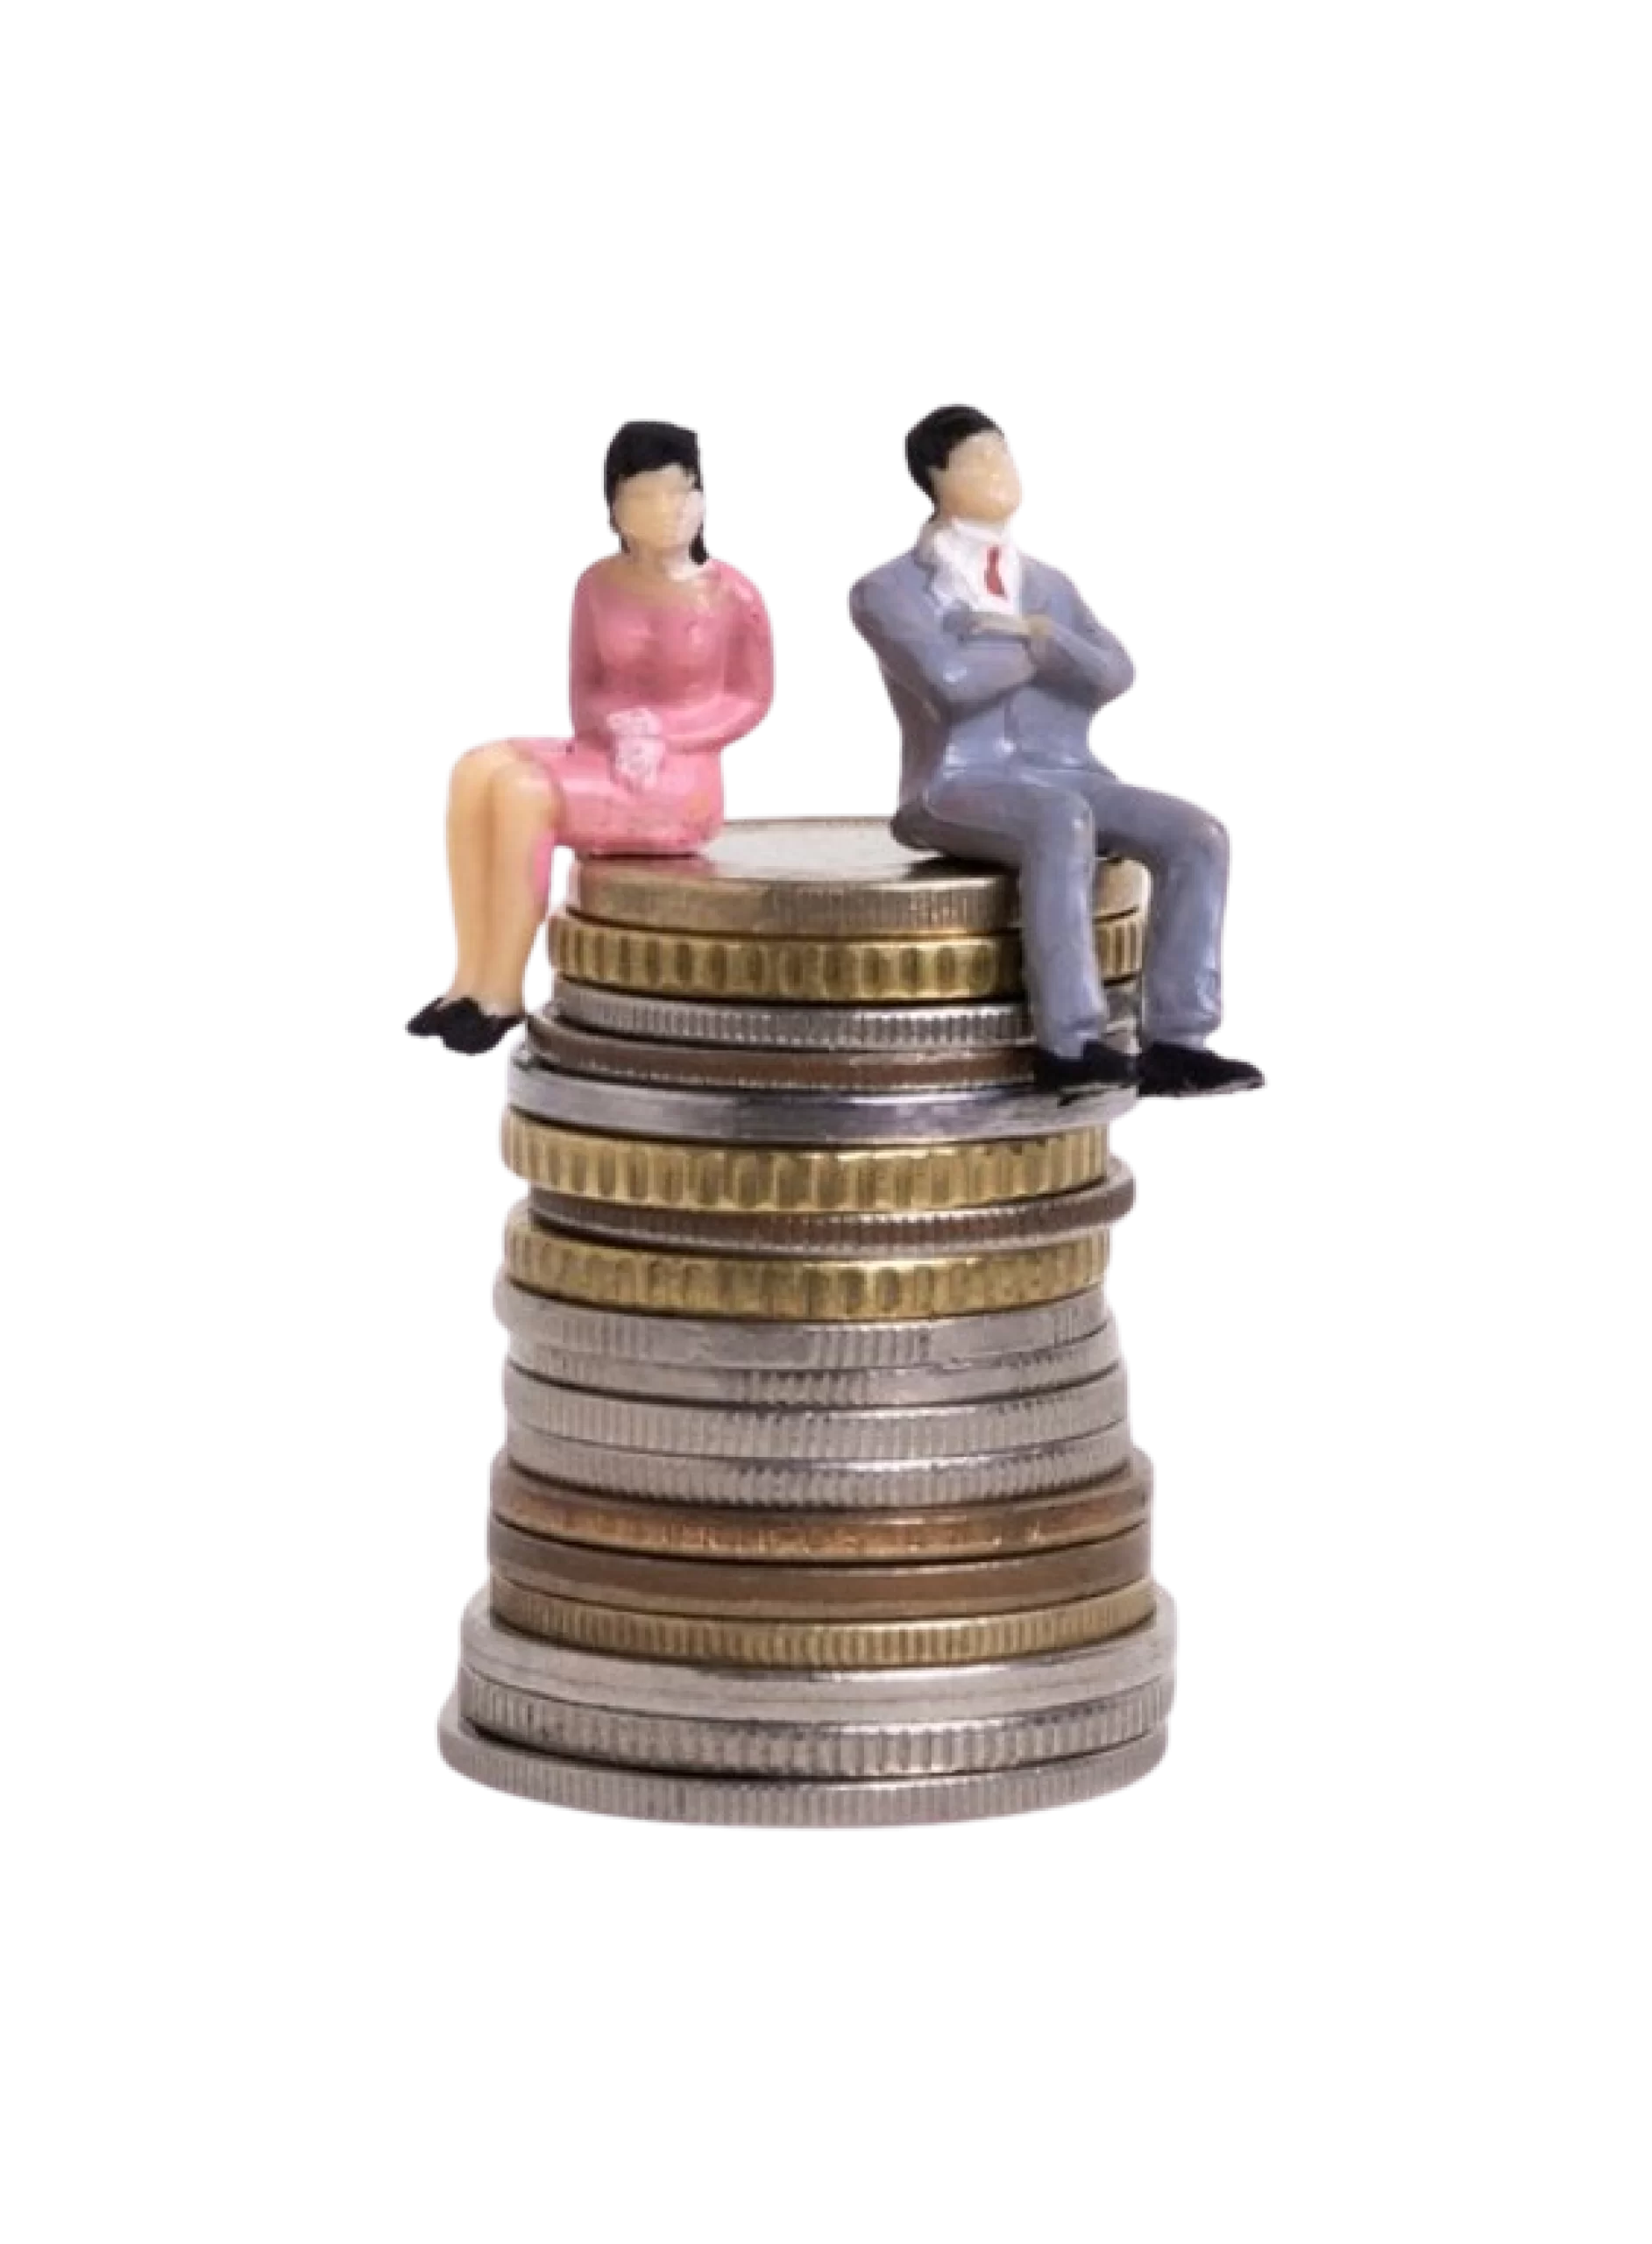 Two figurines sitting on top of a stack of coins.